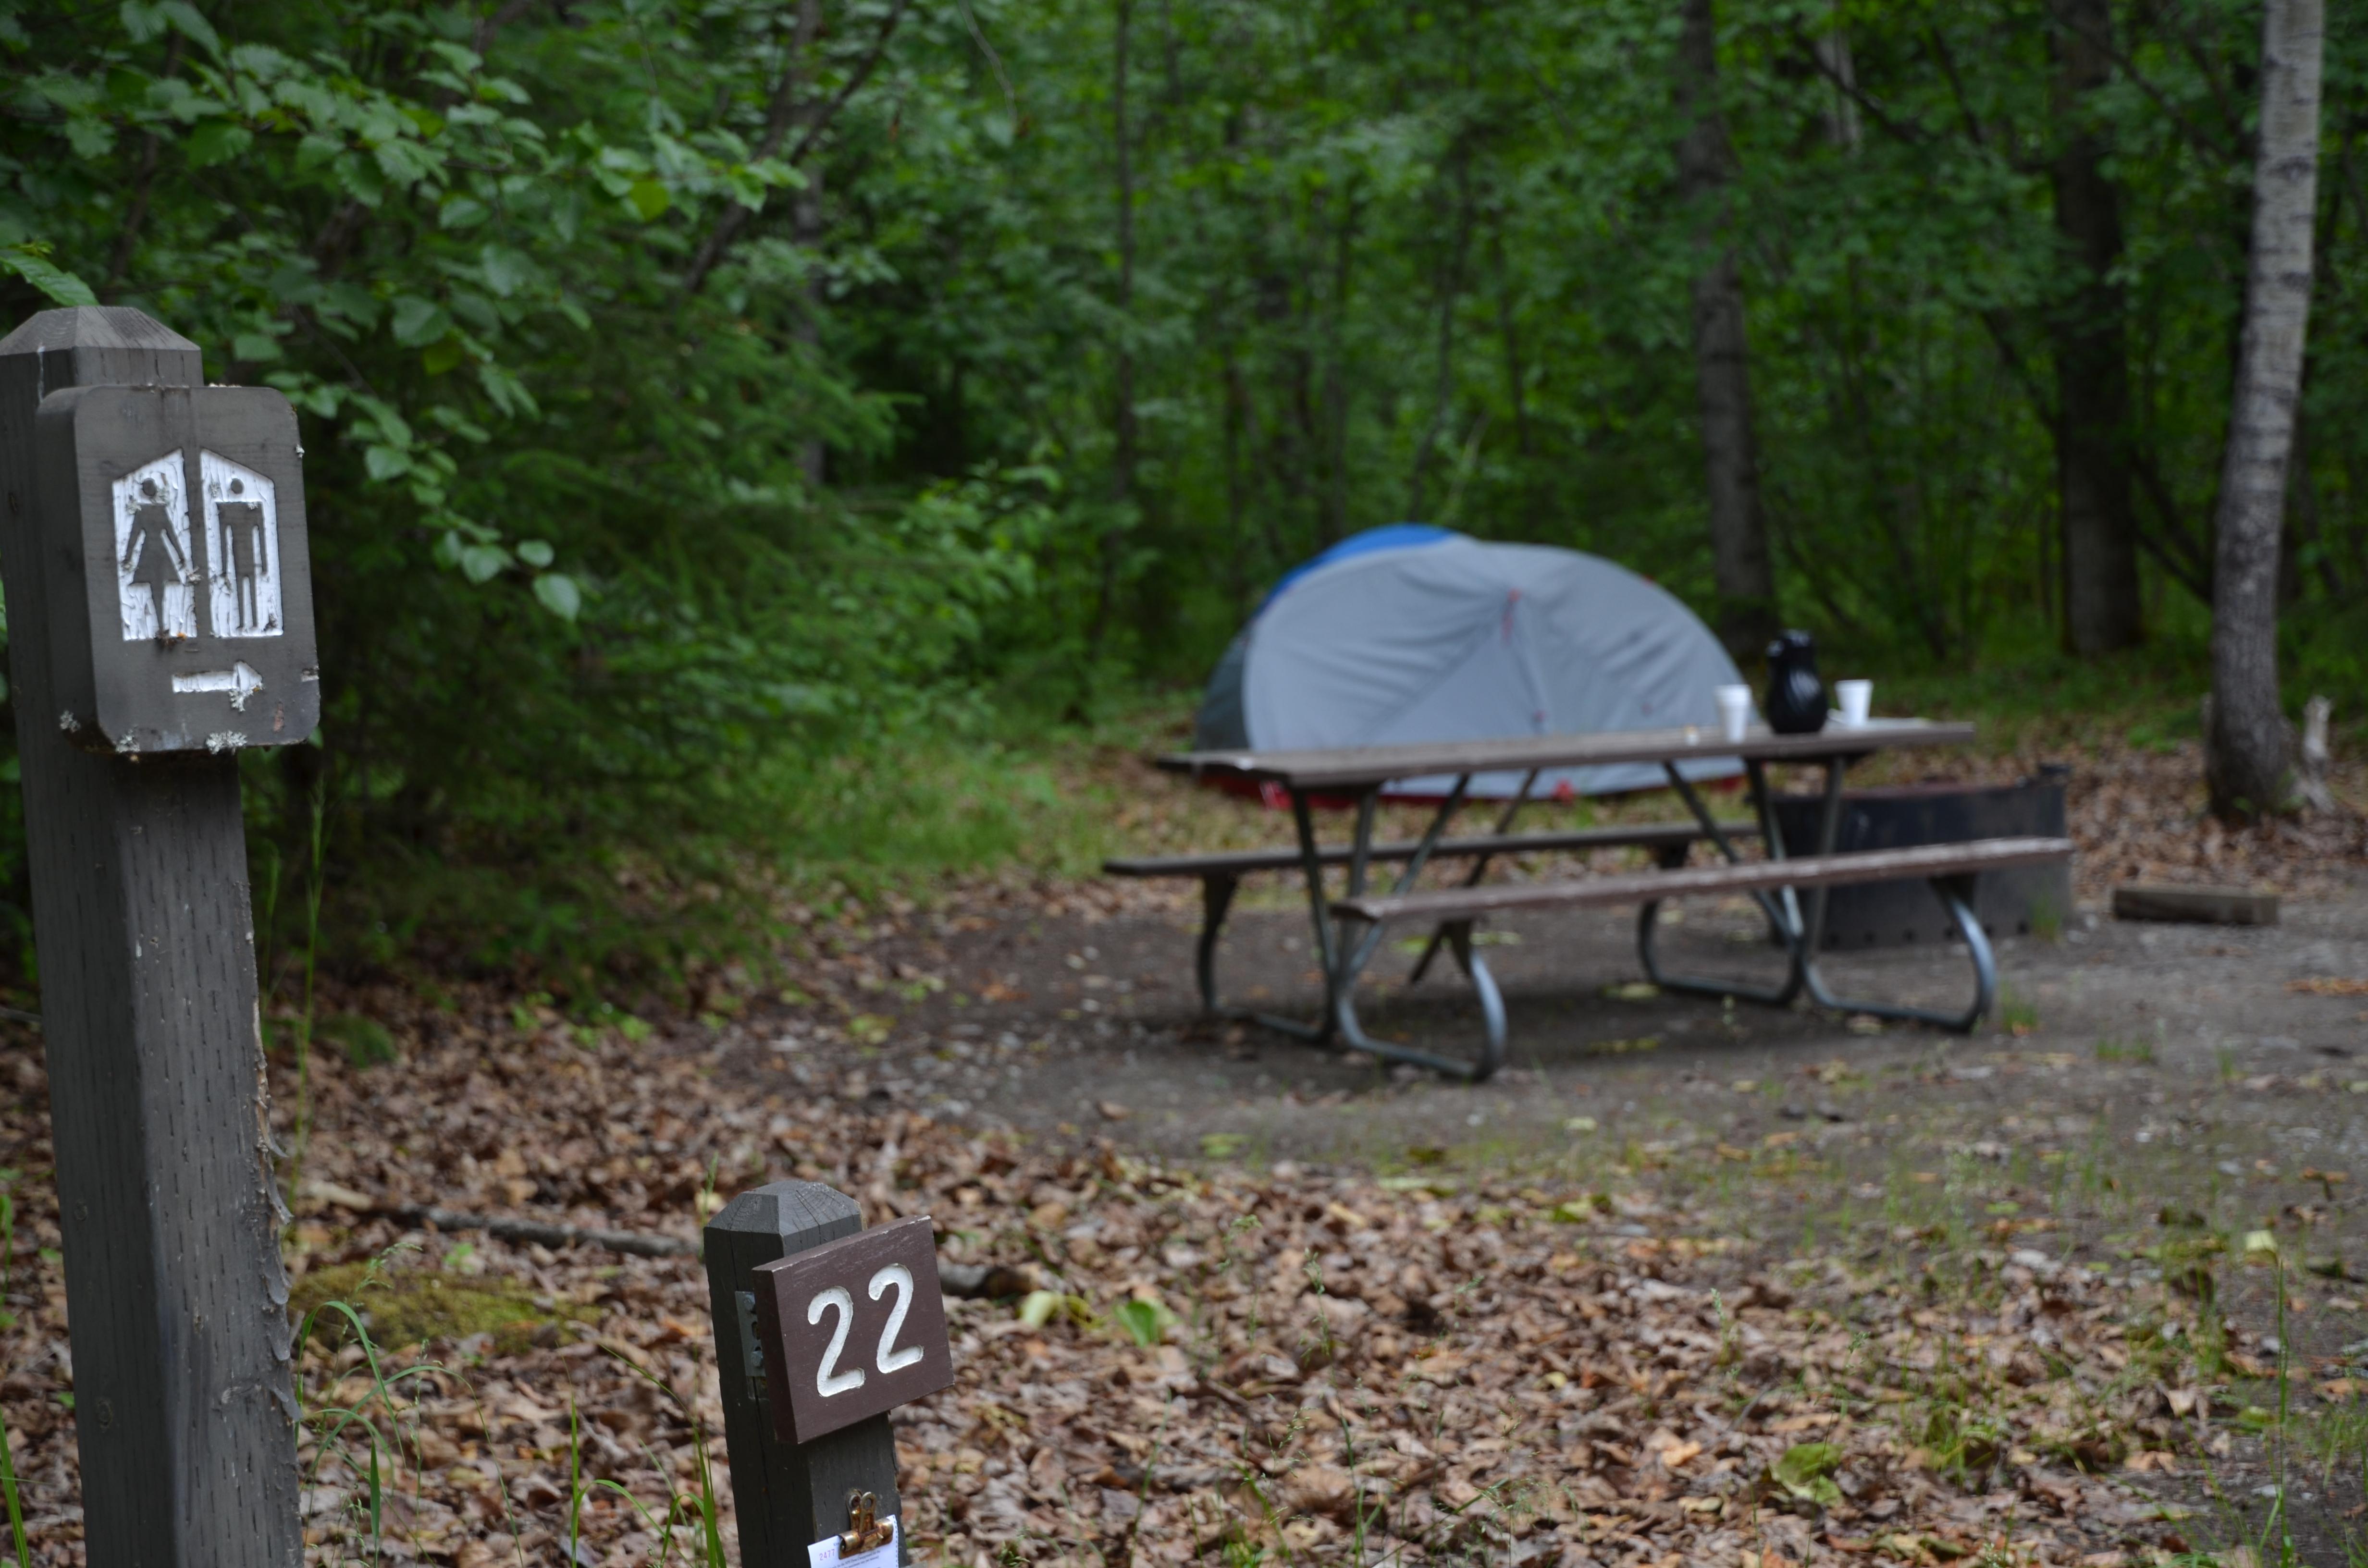 Campsite with a tent, picnic table, and fire ring